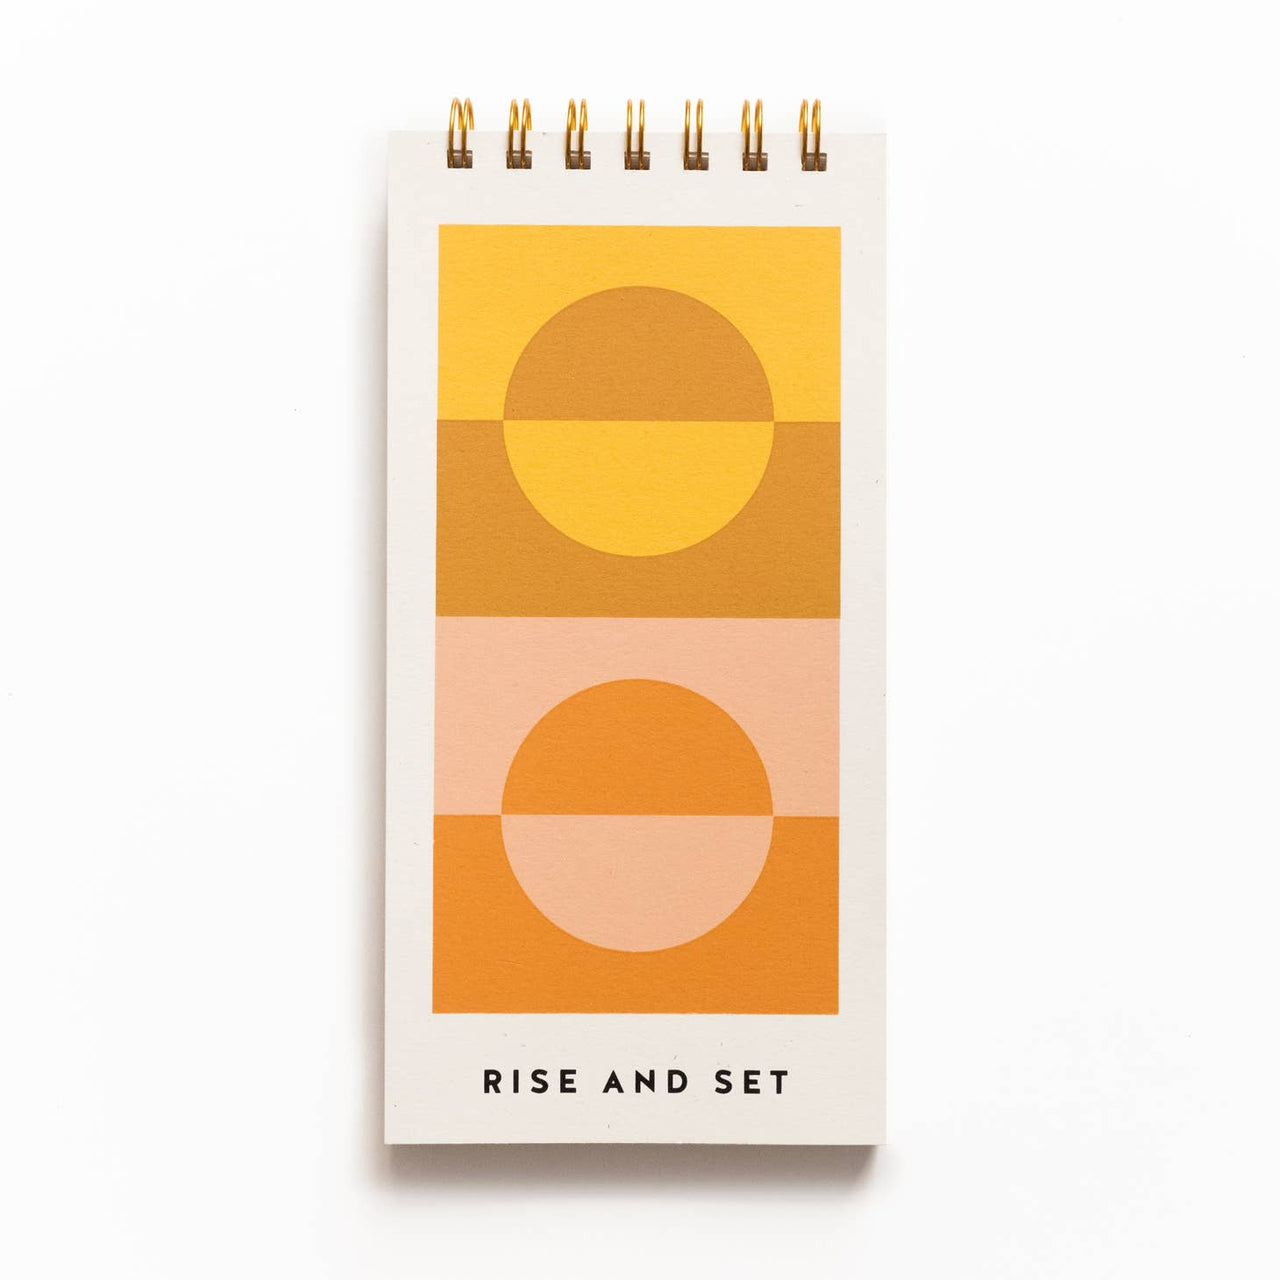 Worthwhile - Journal - Rise & Set Guided Journal